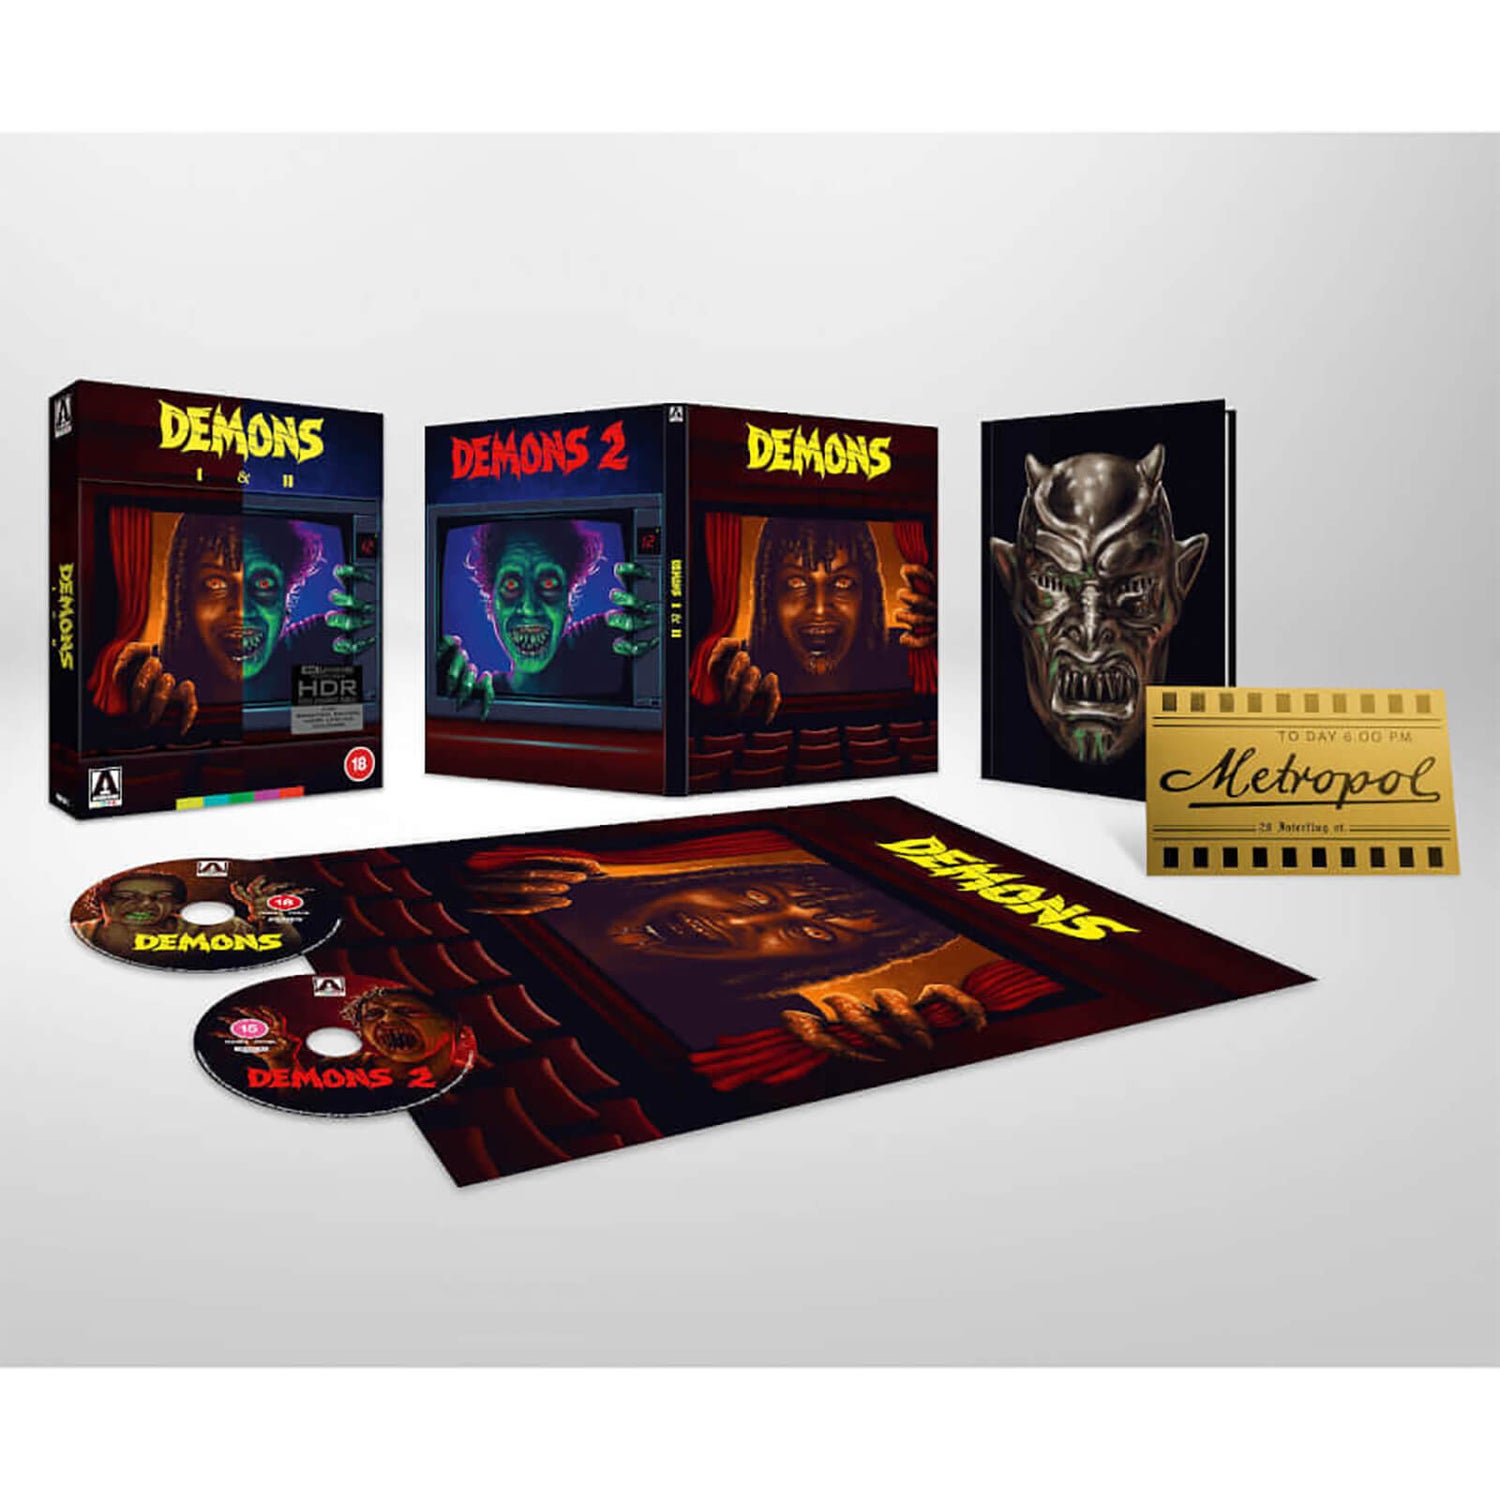 Demons 1 & 2 Limited Edition - 4K Ultra HD